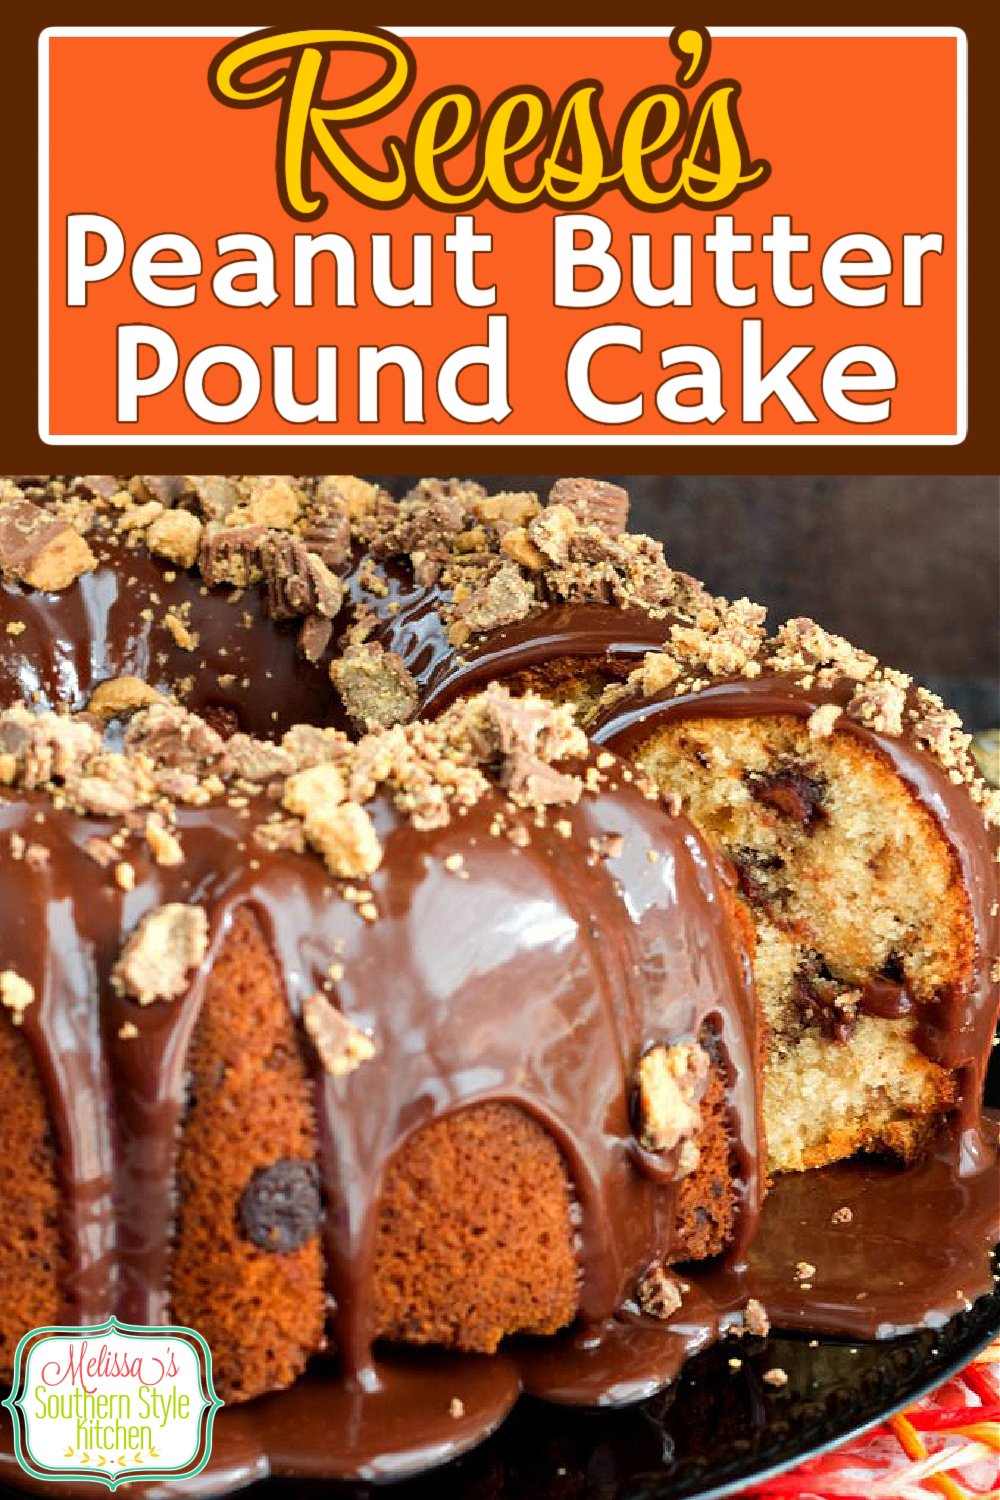 Peanut butter cups and pound cake collide in this delectable chocolate drizzled Reese's Peanut Butter Pound Cake #reesescups #reesescake #reesespoundcake #cakerecipes #poundcake #peanutbutter #chocolate #cakerecipes #cake #holidaybaking #holidays #southernfood #southernrecipes via @melissasssk